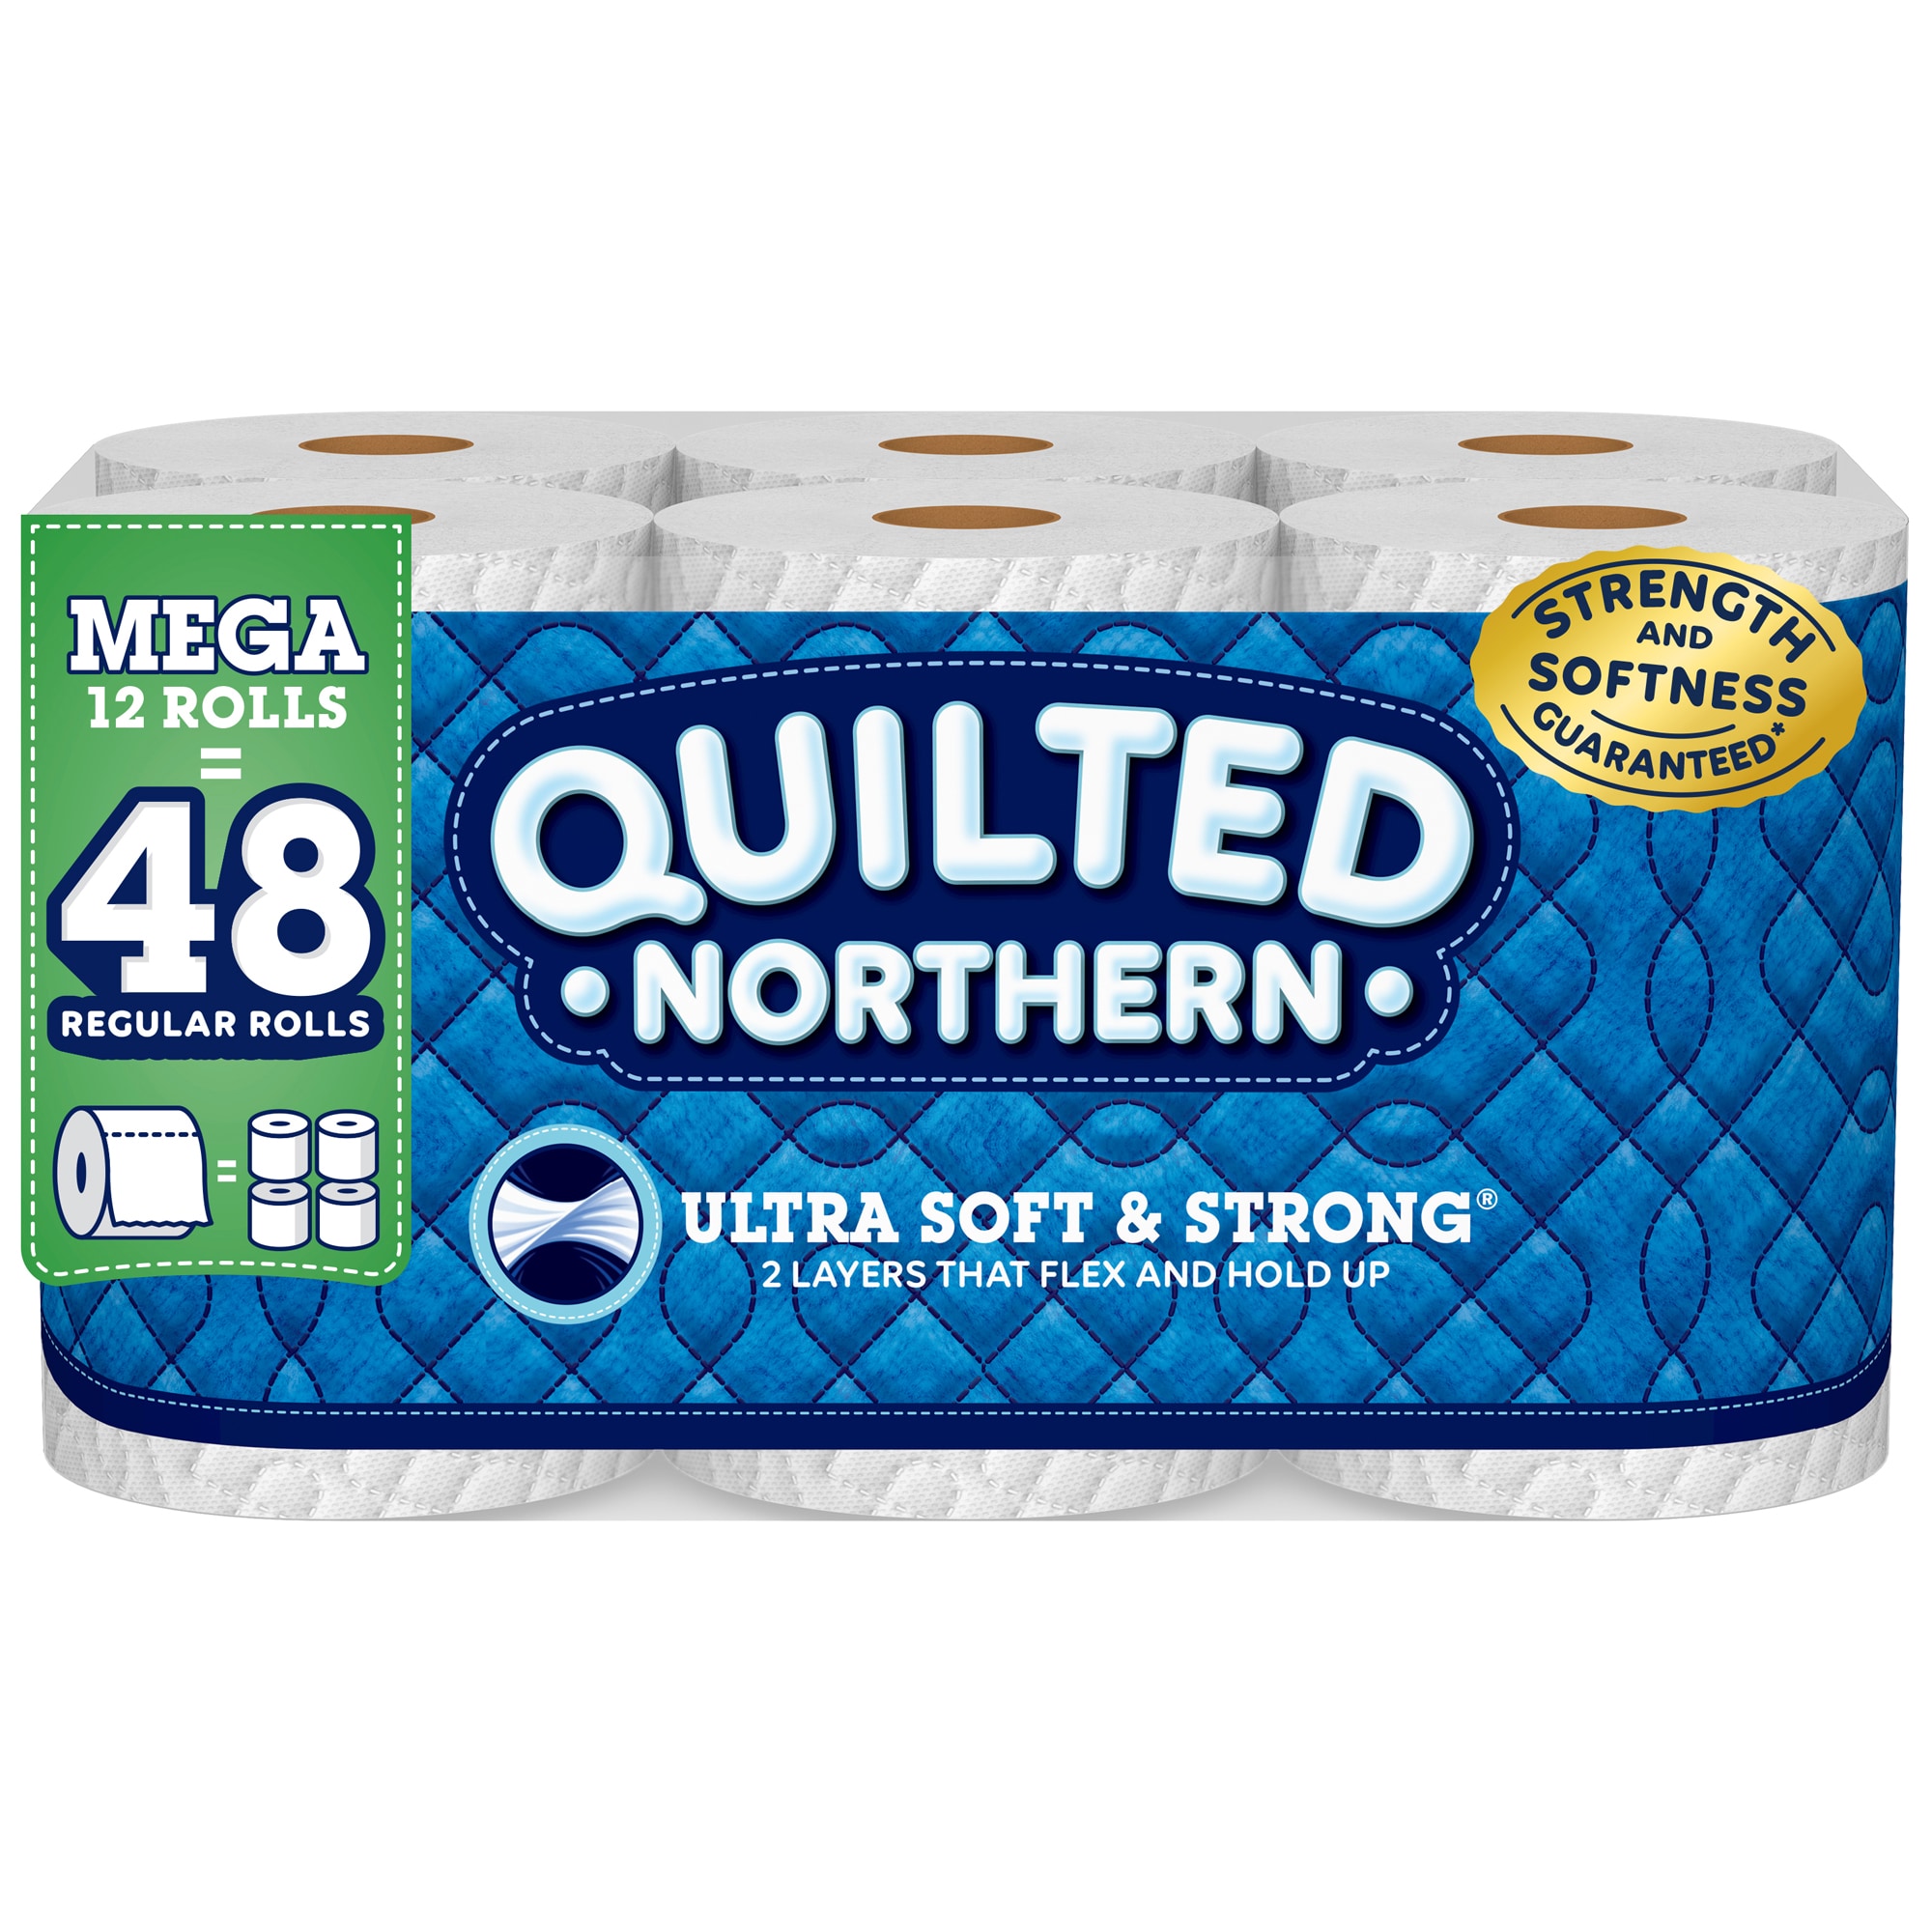 18-Count Quilted Northern Ultra Plush 3-Ply Mega Roll Toilet Paper